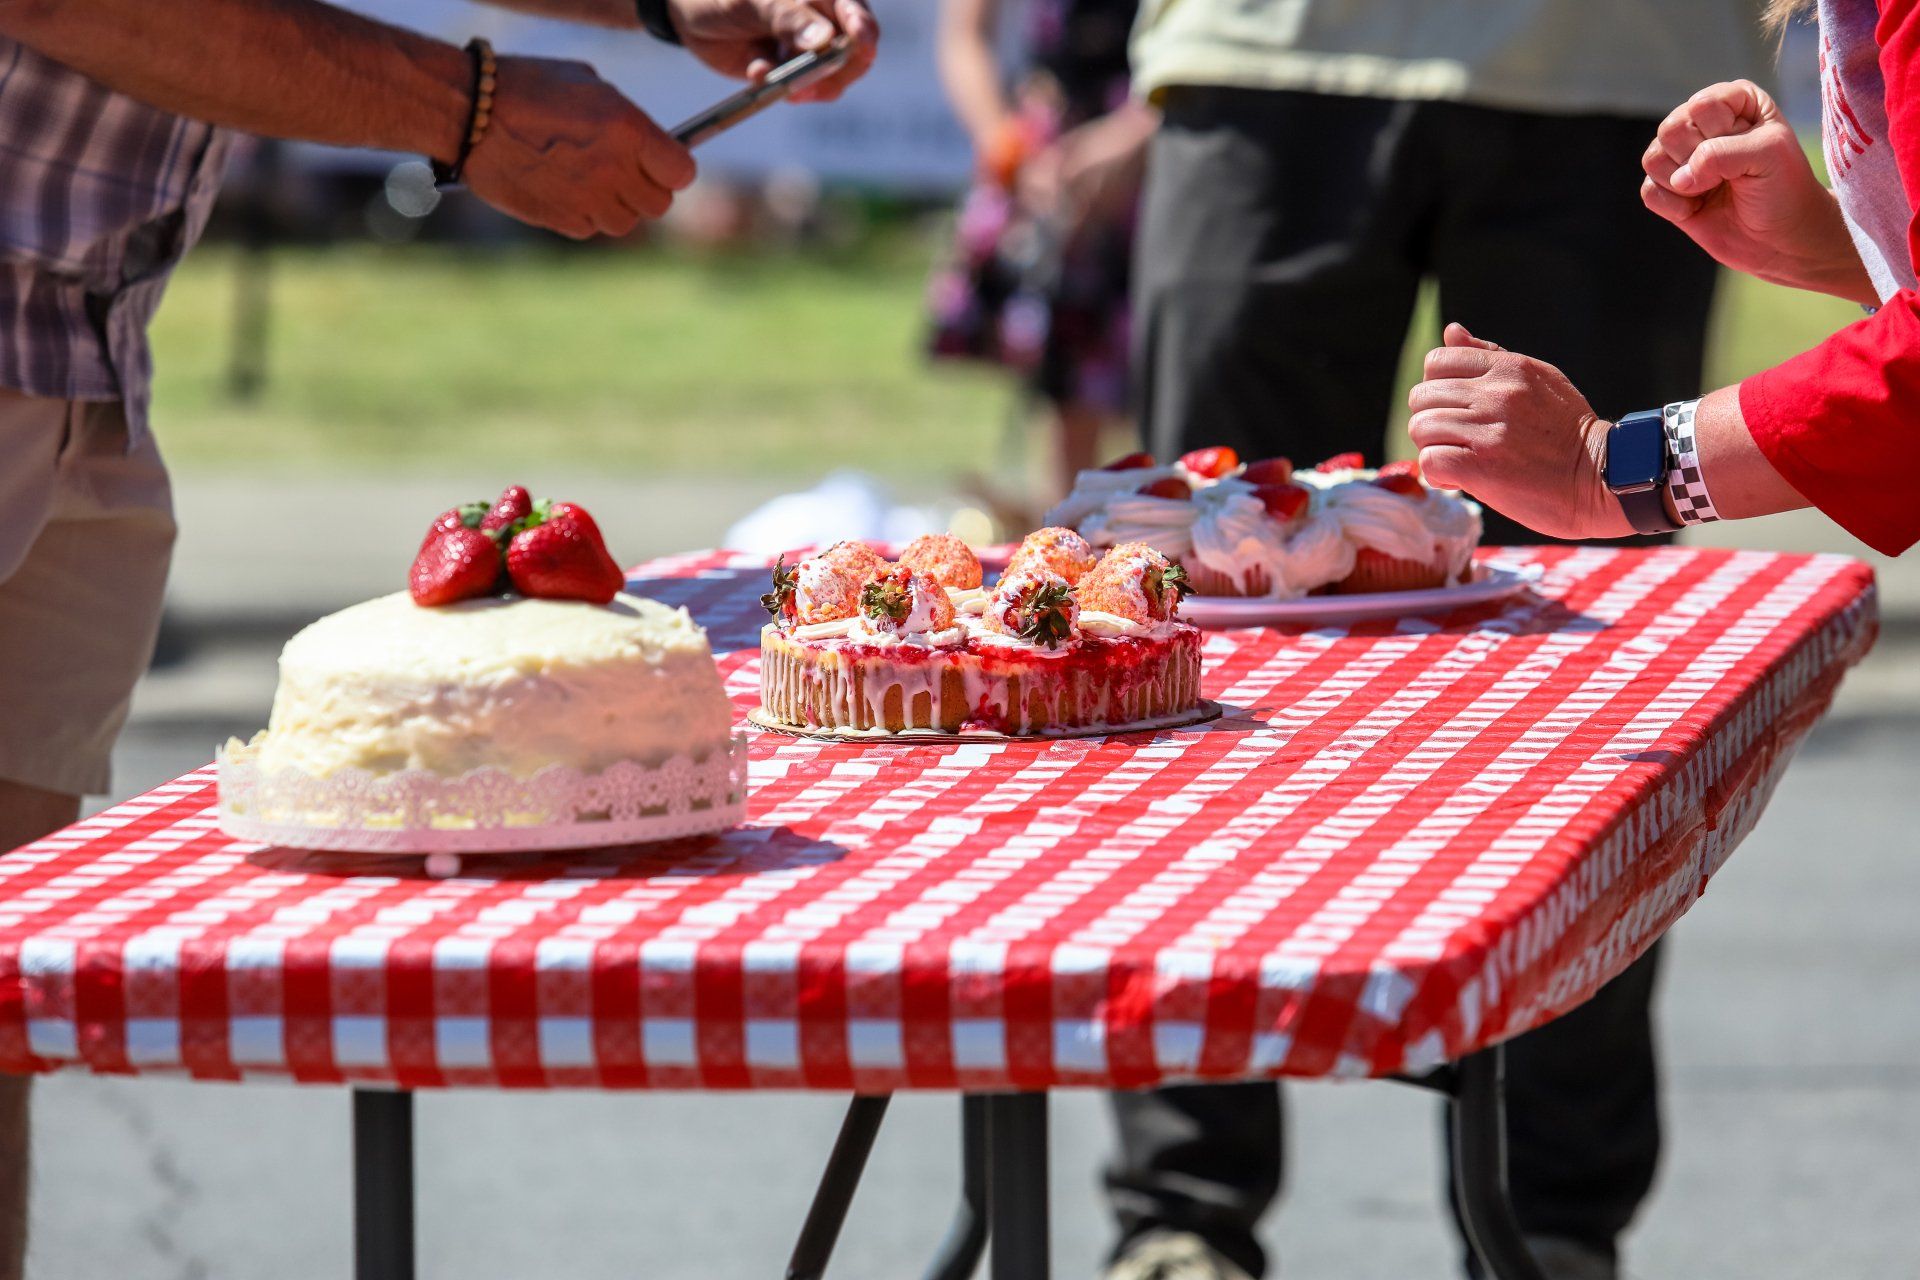 a person is cutting a cake on a table with a red and white checkered tablecloth .